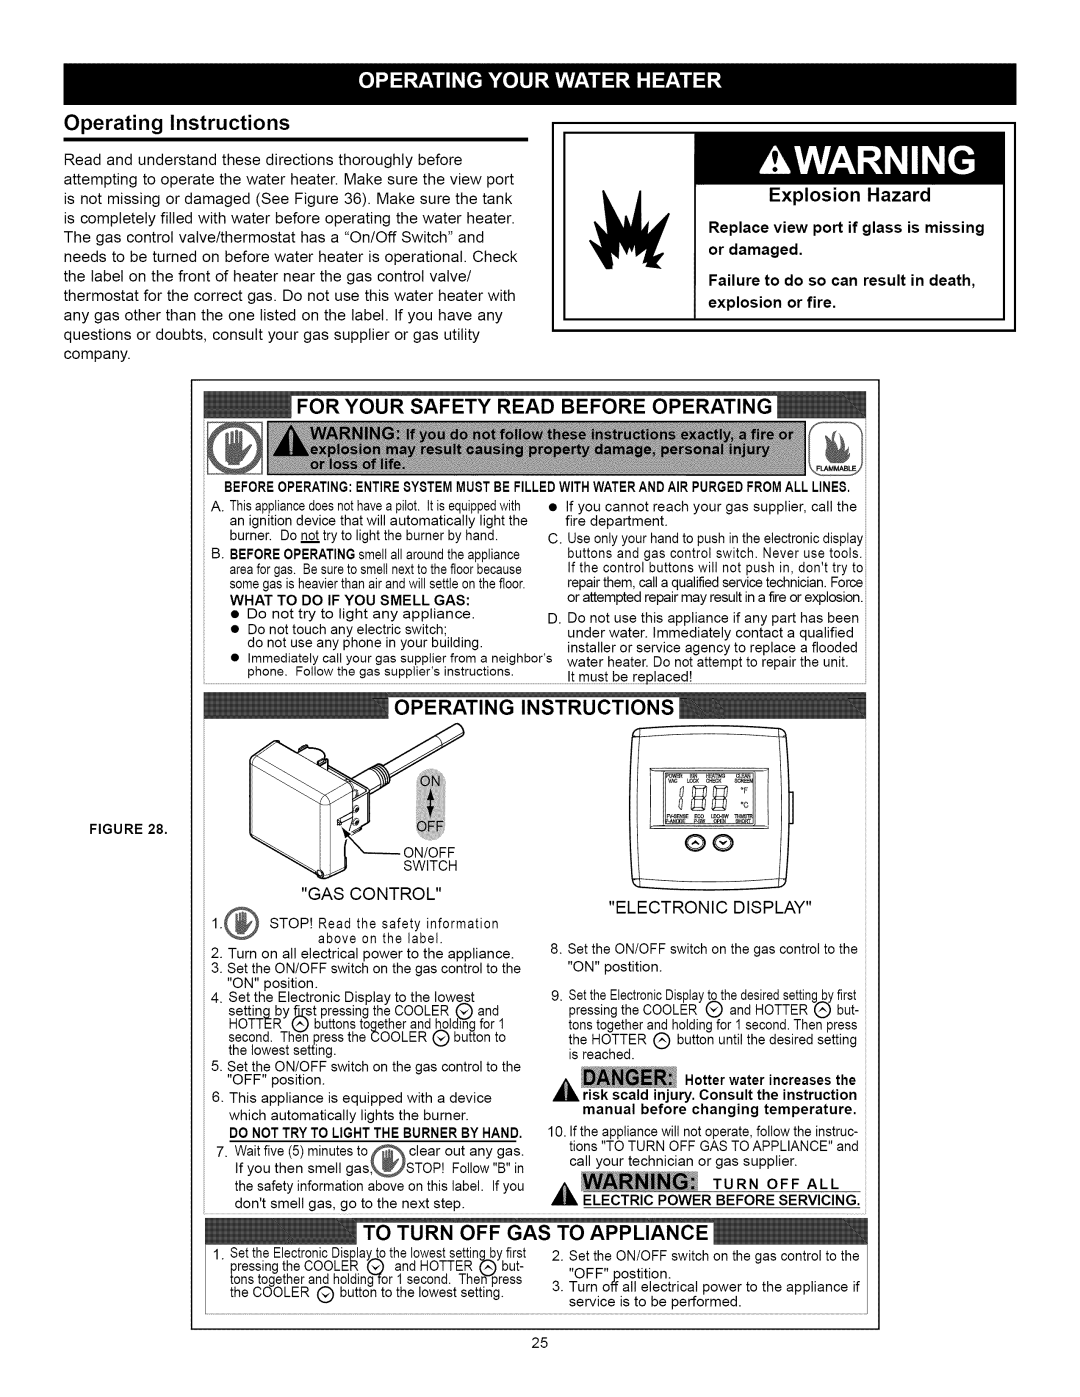 Kenmore 153.33262 I:oo, Operating Instructions, Instructions _, Explosion Hazard, Fo-=Ryoursafety Read Before Operating 